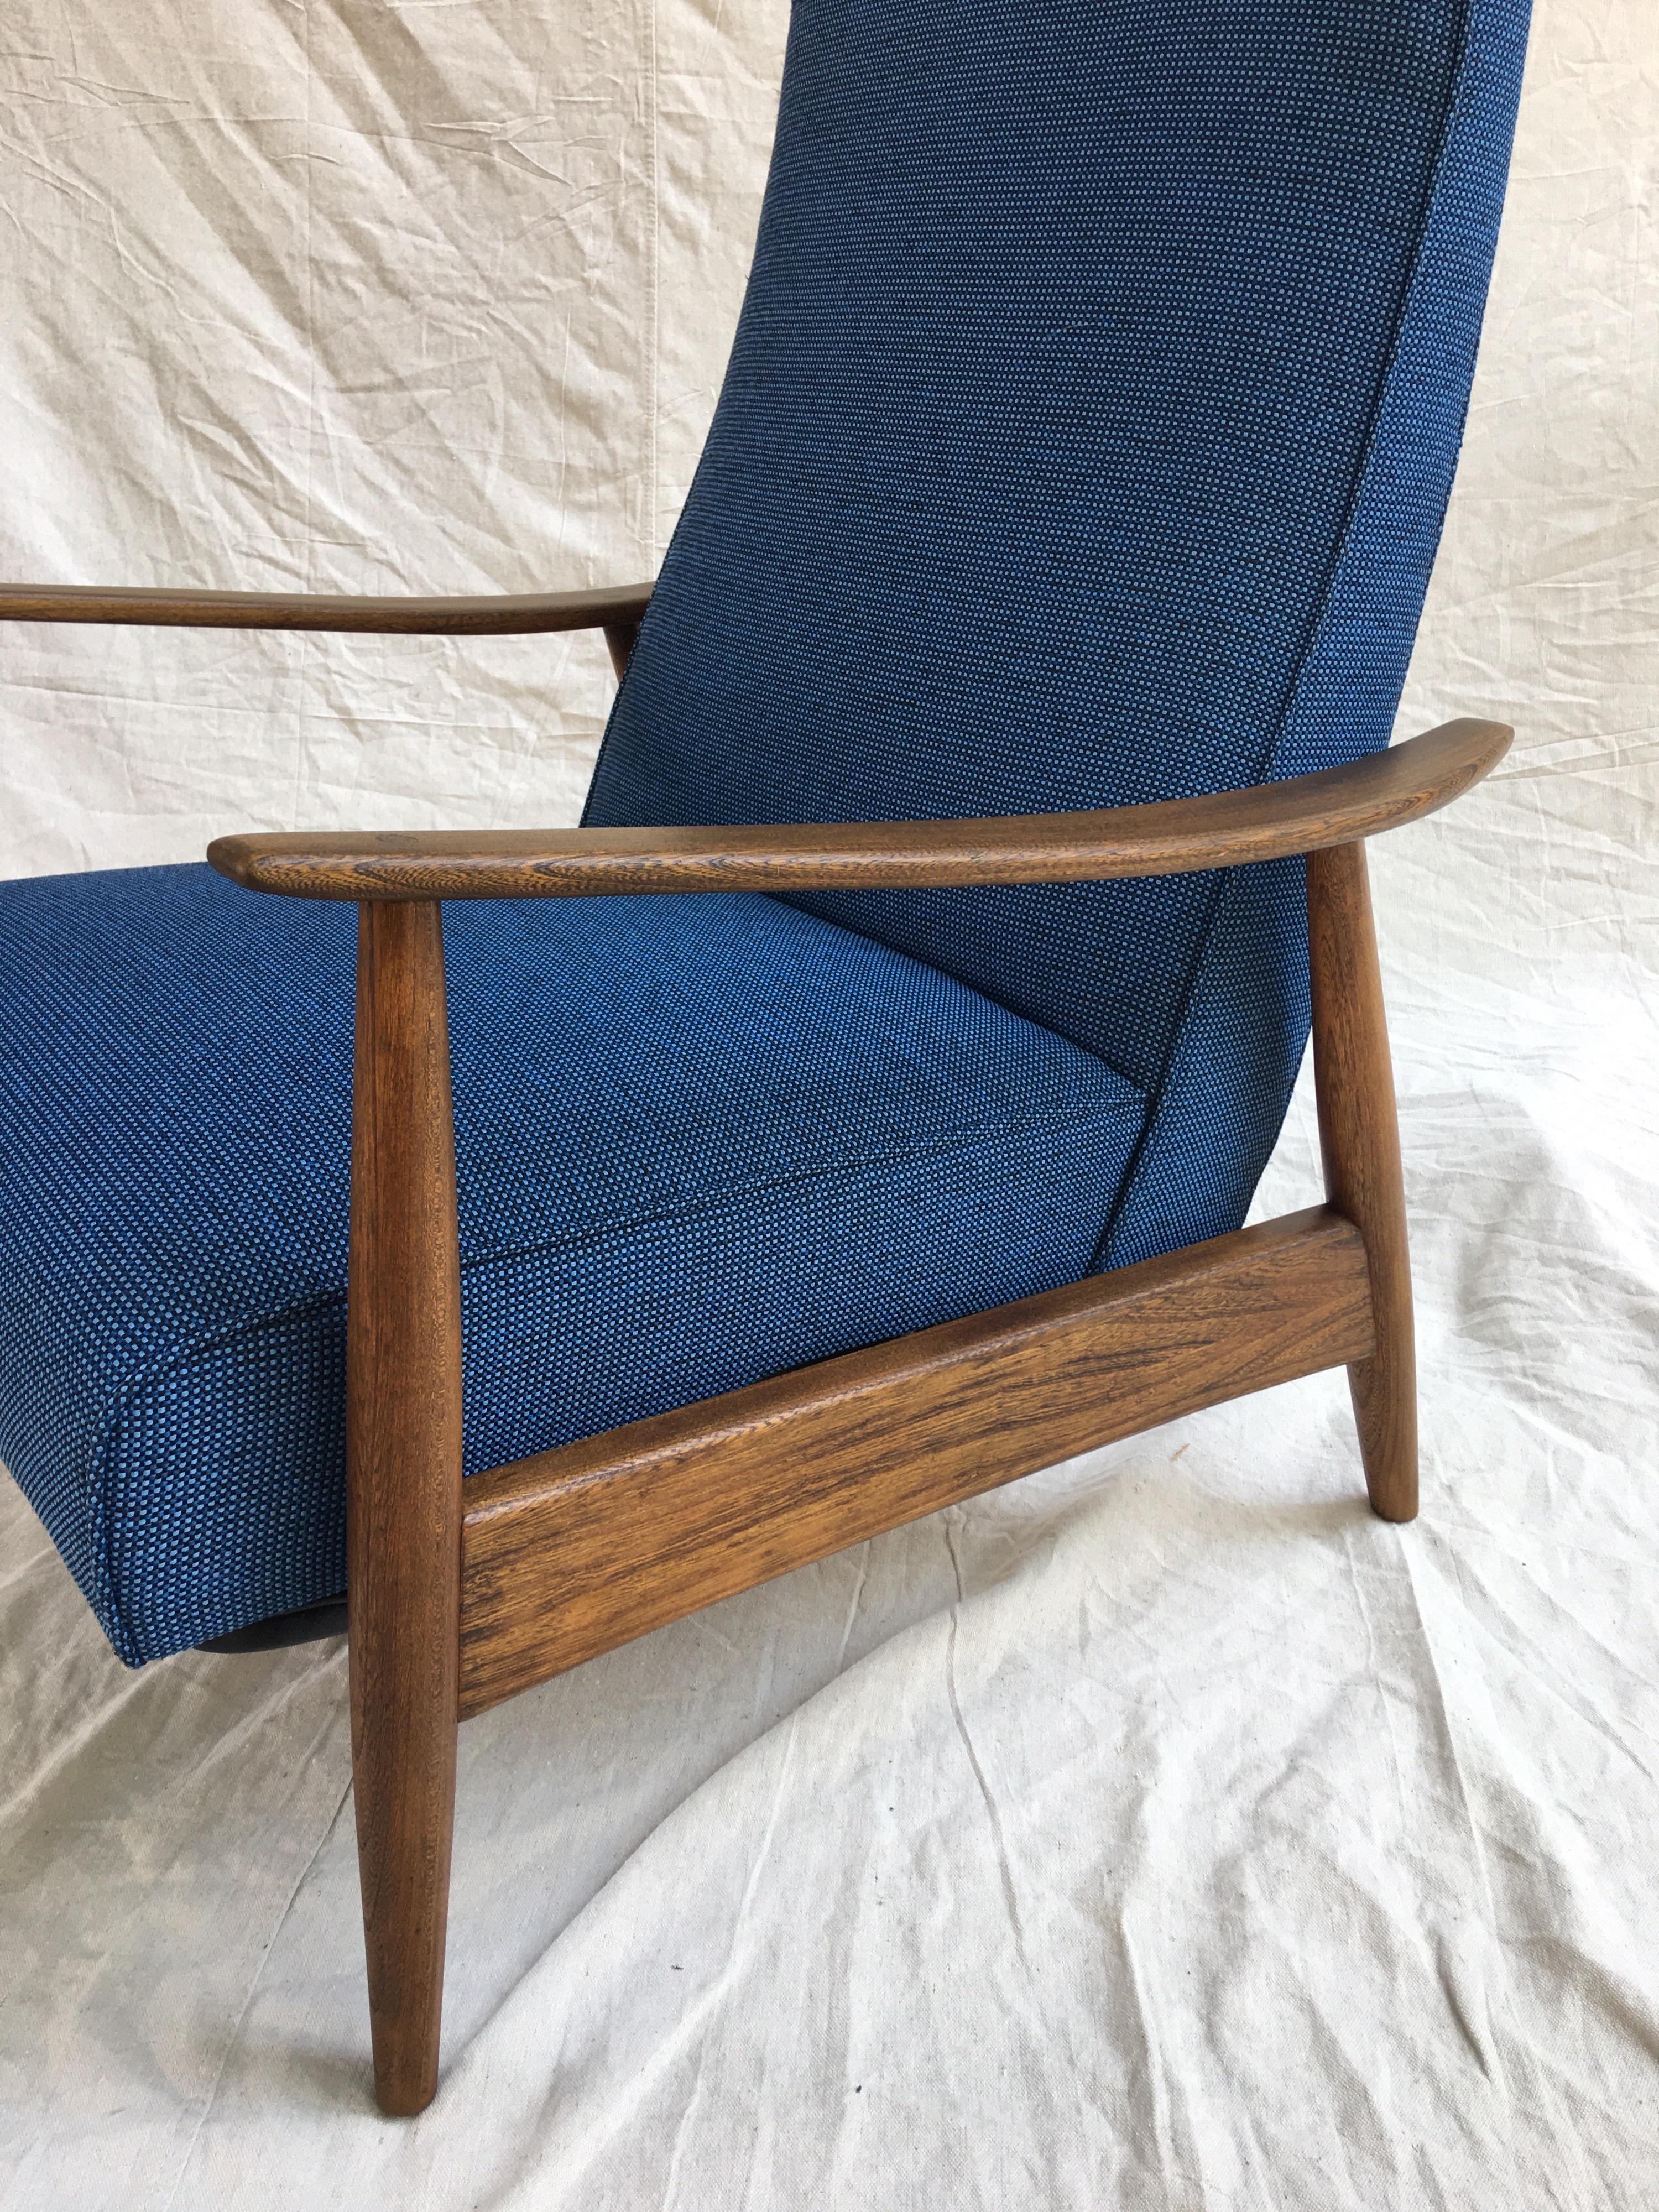 Mid-20th Century 1960s Recliner in the style of Milo Baughman